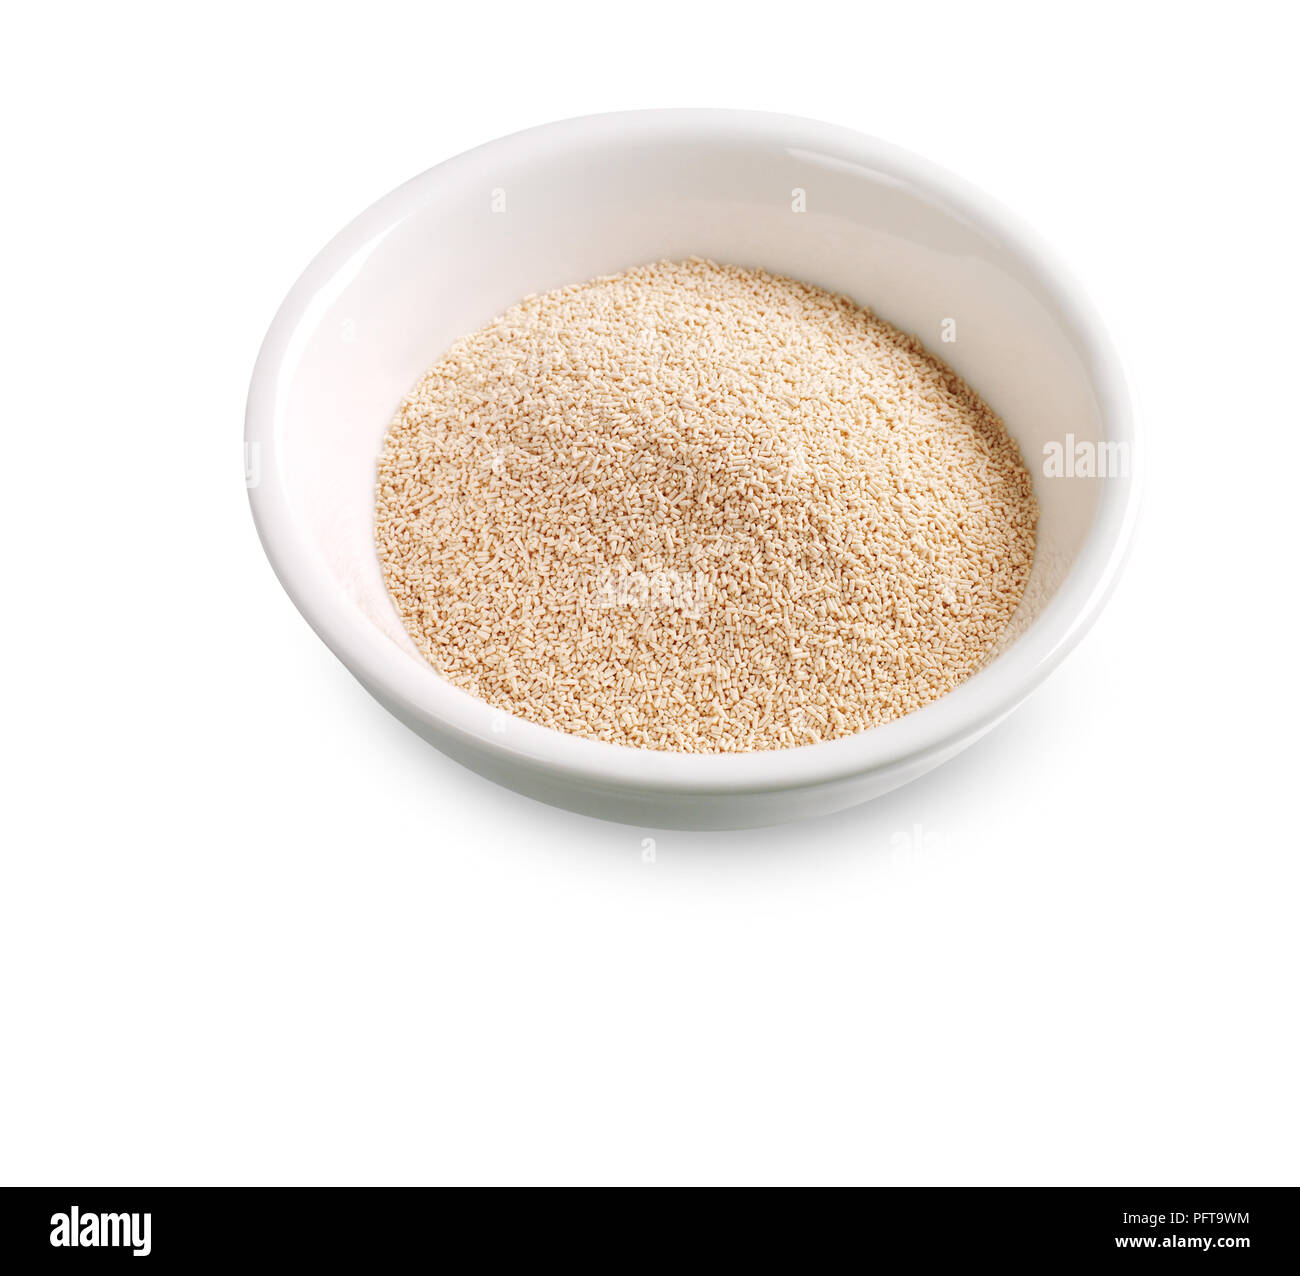 Bowl of dried yeast for brewing beer Stock Photo